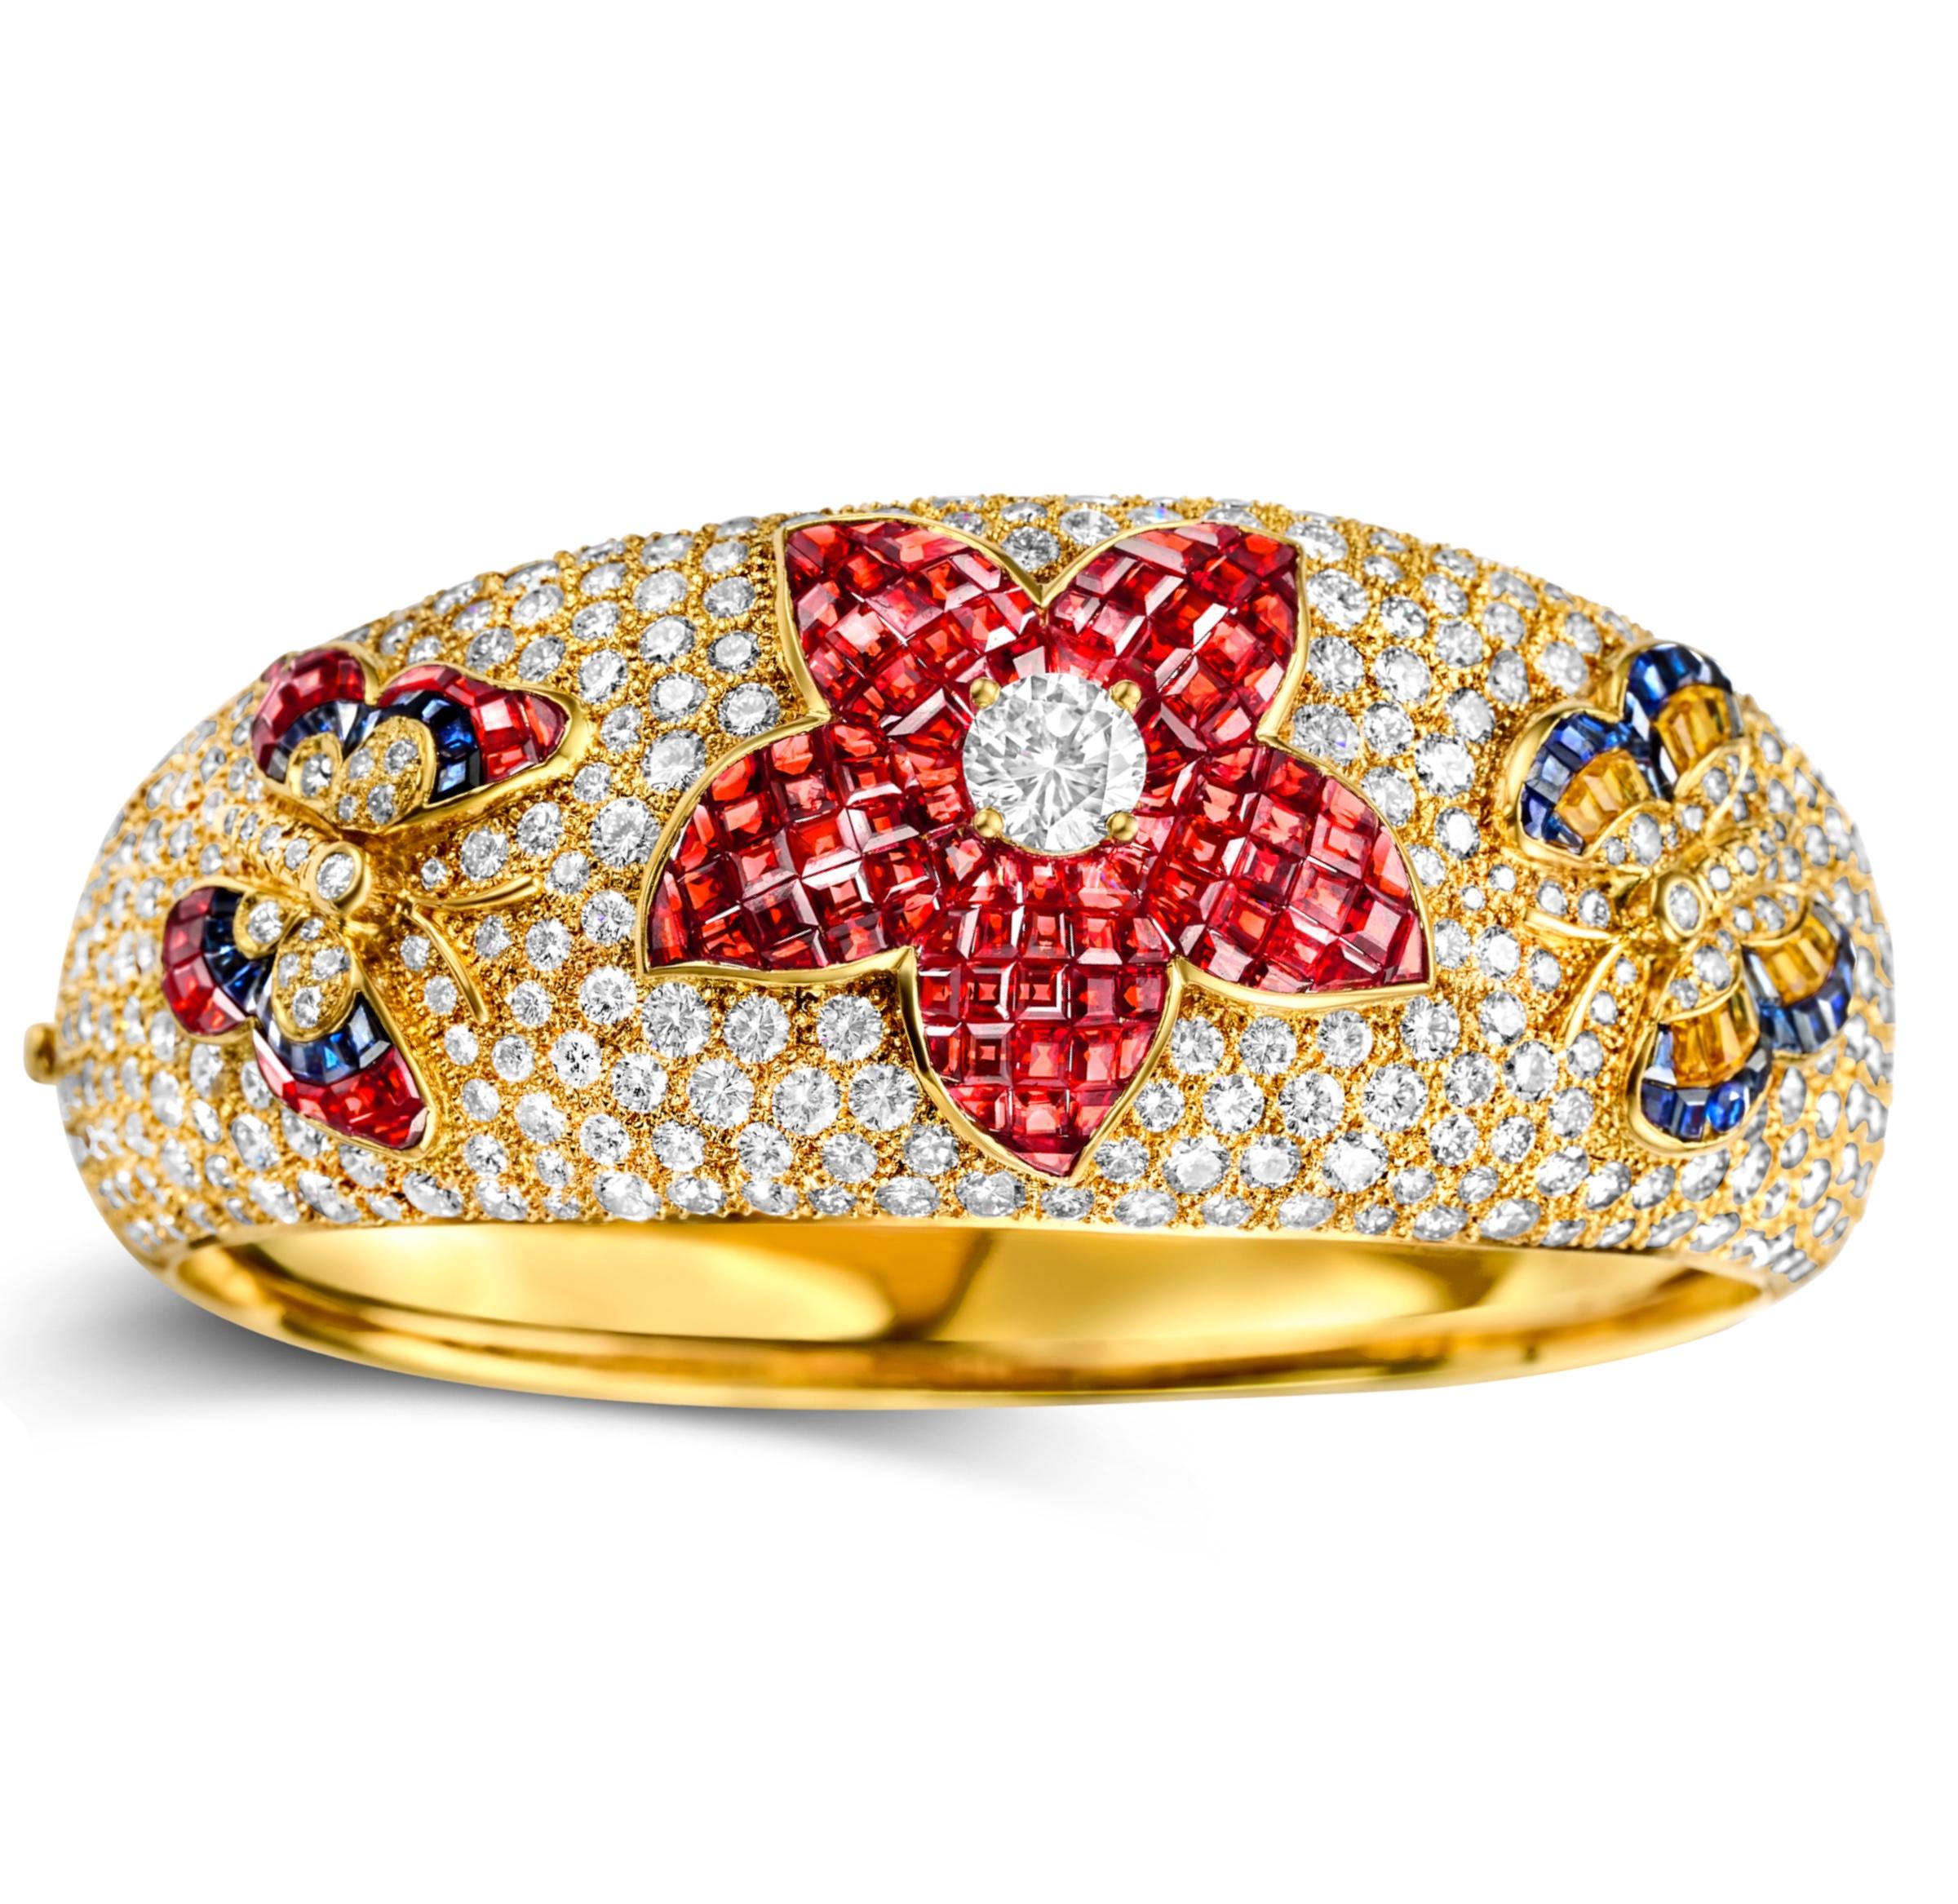 Magnificent 18 kt. Yellow Gold Wide Bangle Bracelet With Diamonds, Rubies, Blue & Yellow Sapphires.

One of A Kind !

Diamonds: Brilliant cut diamonds together 17.86 ct.

Ruby: Square cut rubies, together 7.92 ct.

Blue Sapphire: sapphires together